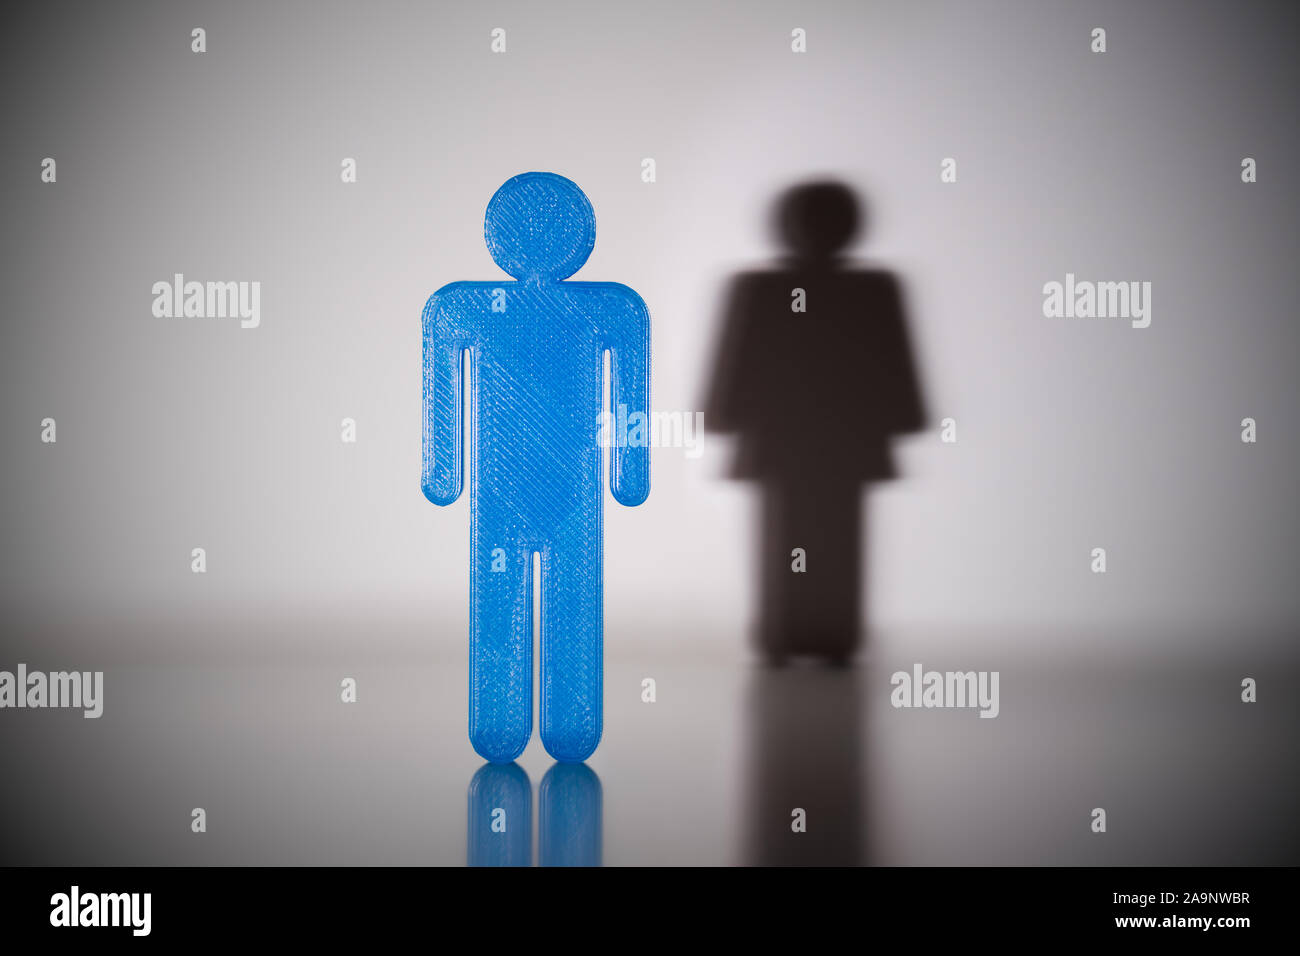 Blue Male Gender Human Figure With Shadow Of Female Gender Human Figure On Wall Stock Photo